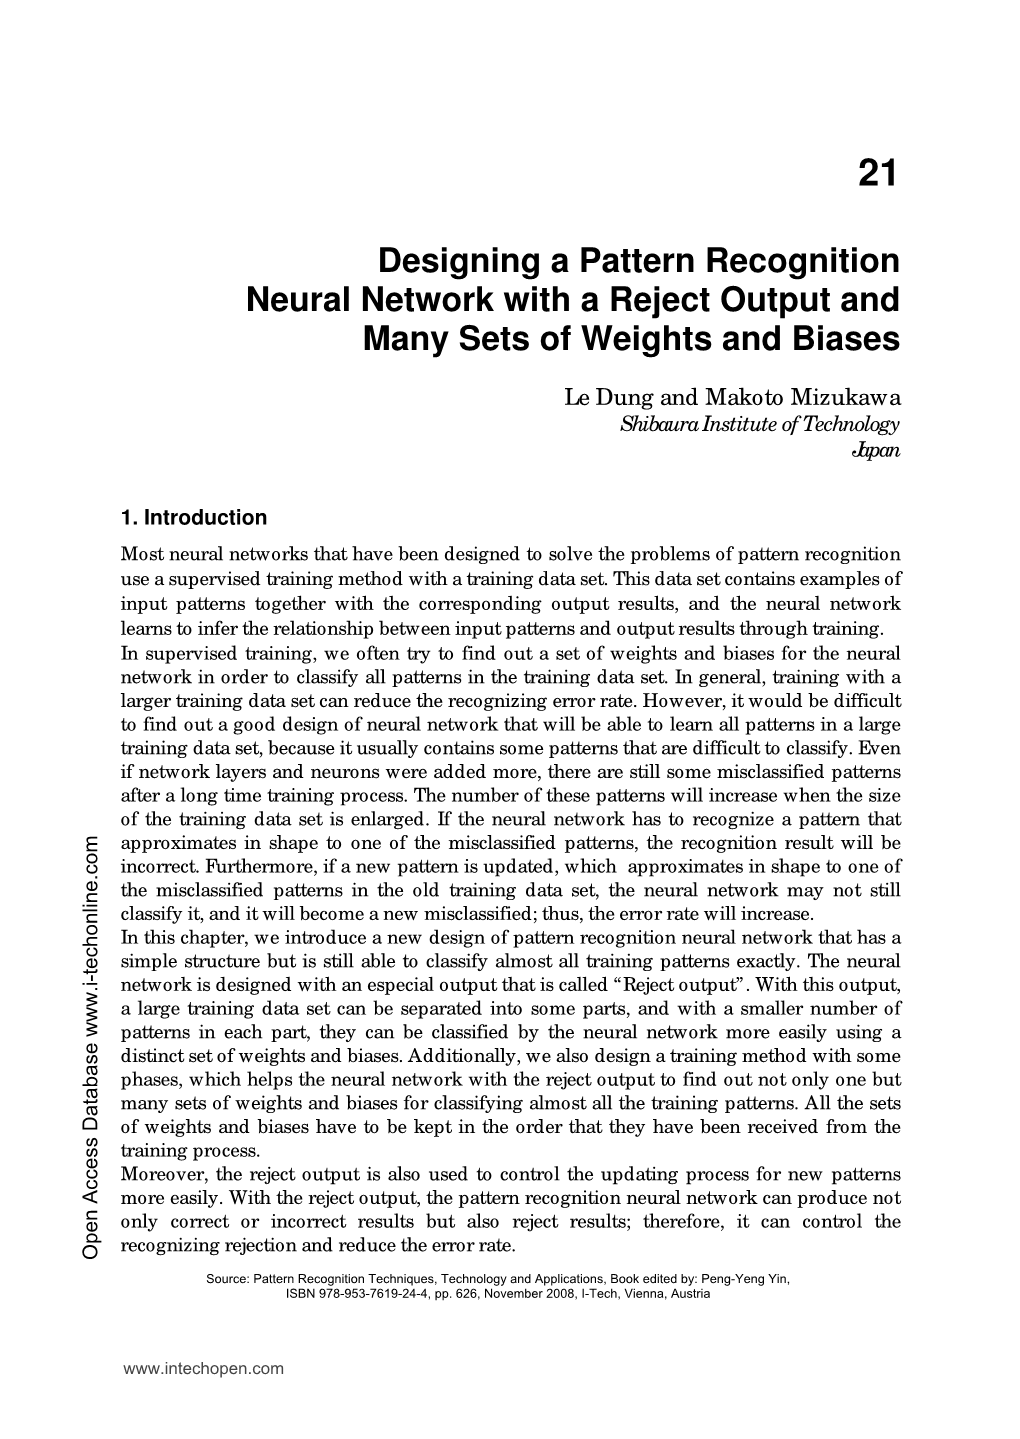 Designing a Pattern Recognition Neural Network with a Reject Output and Many Sets of Weights and Biases